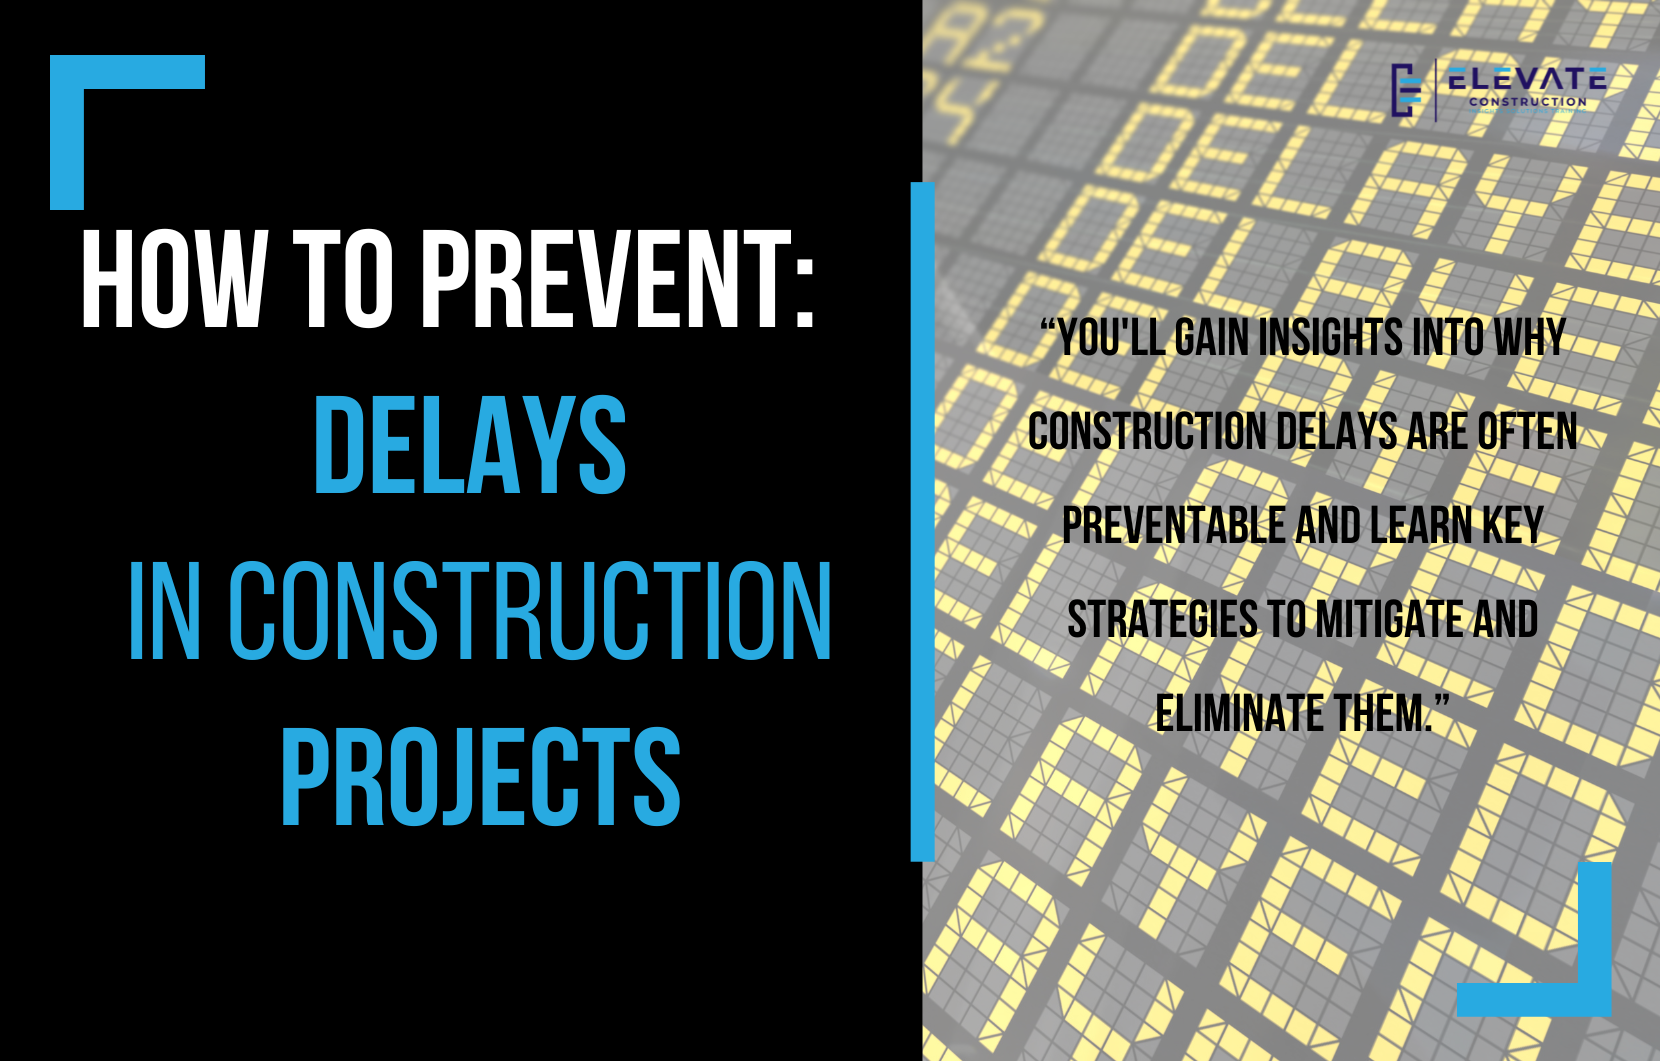 How to Effectively Prevent Delays in Construction Projects